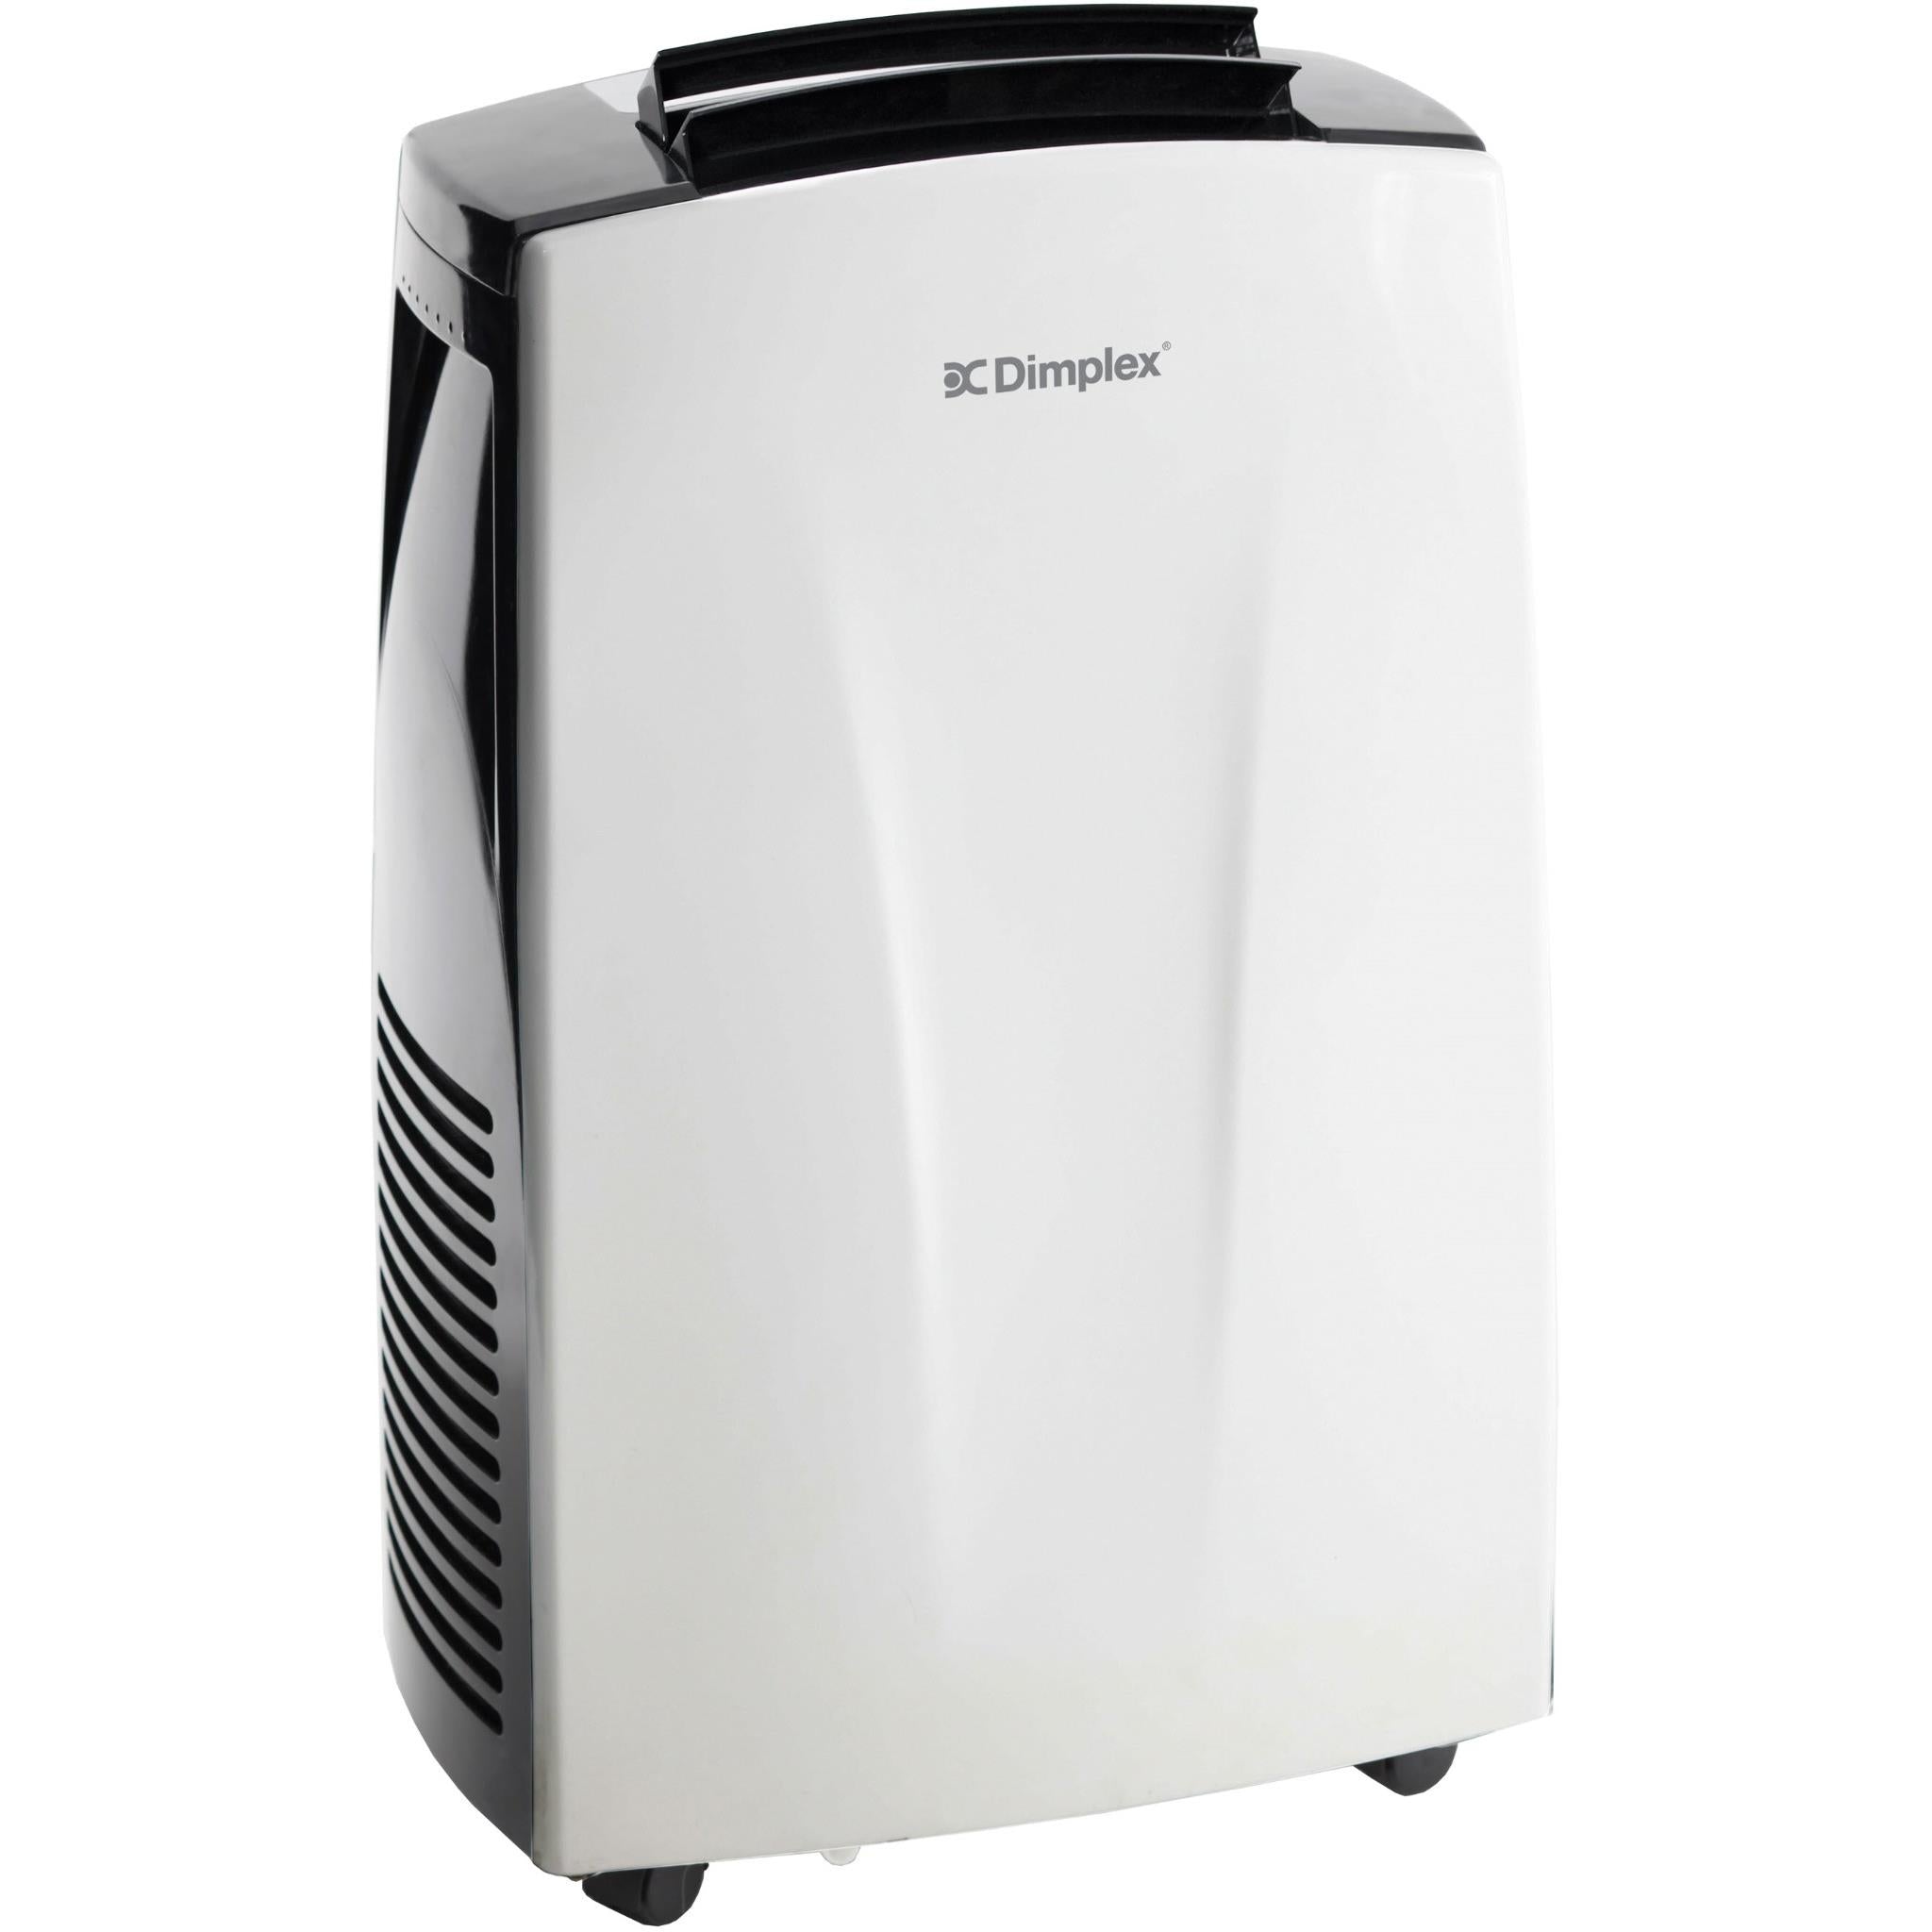 dimplex dc18 5.3kw portable air conditioner with dehumidifier